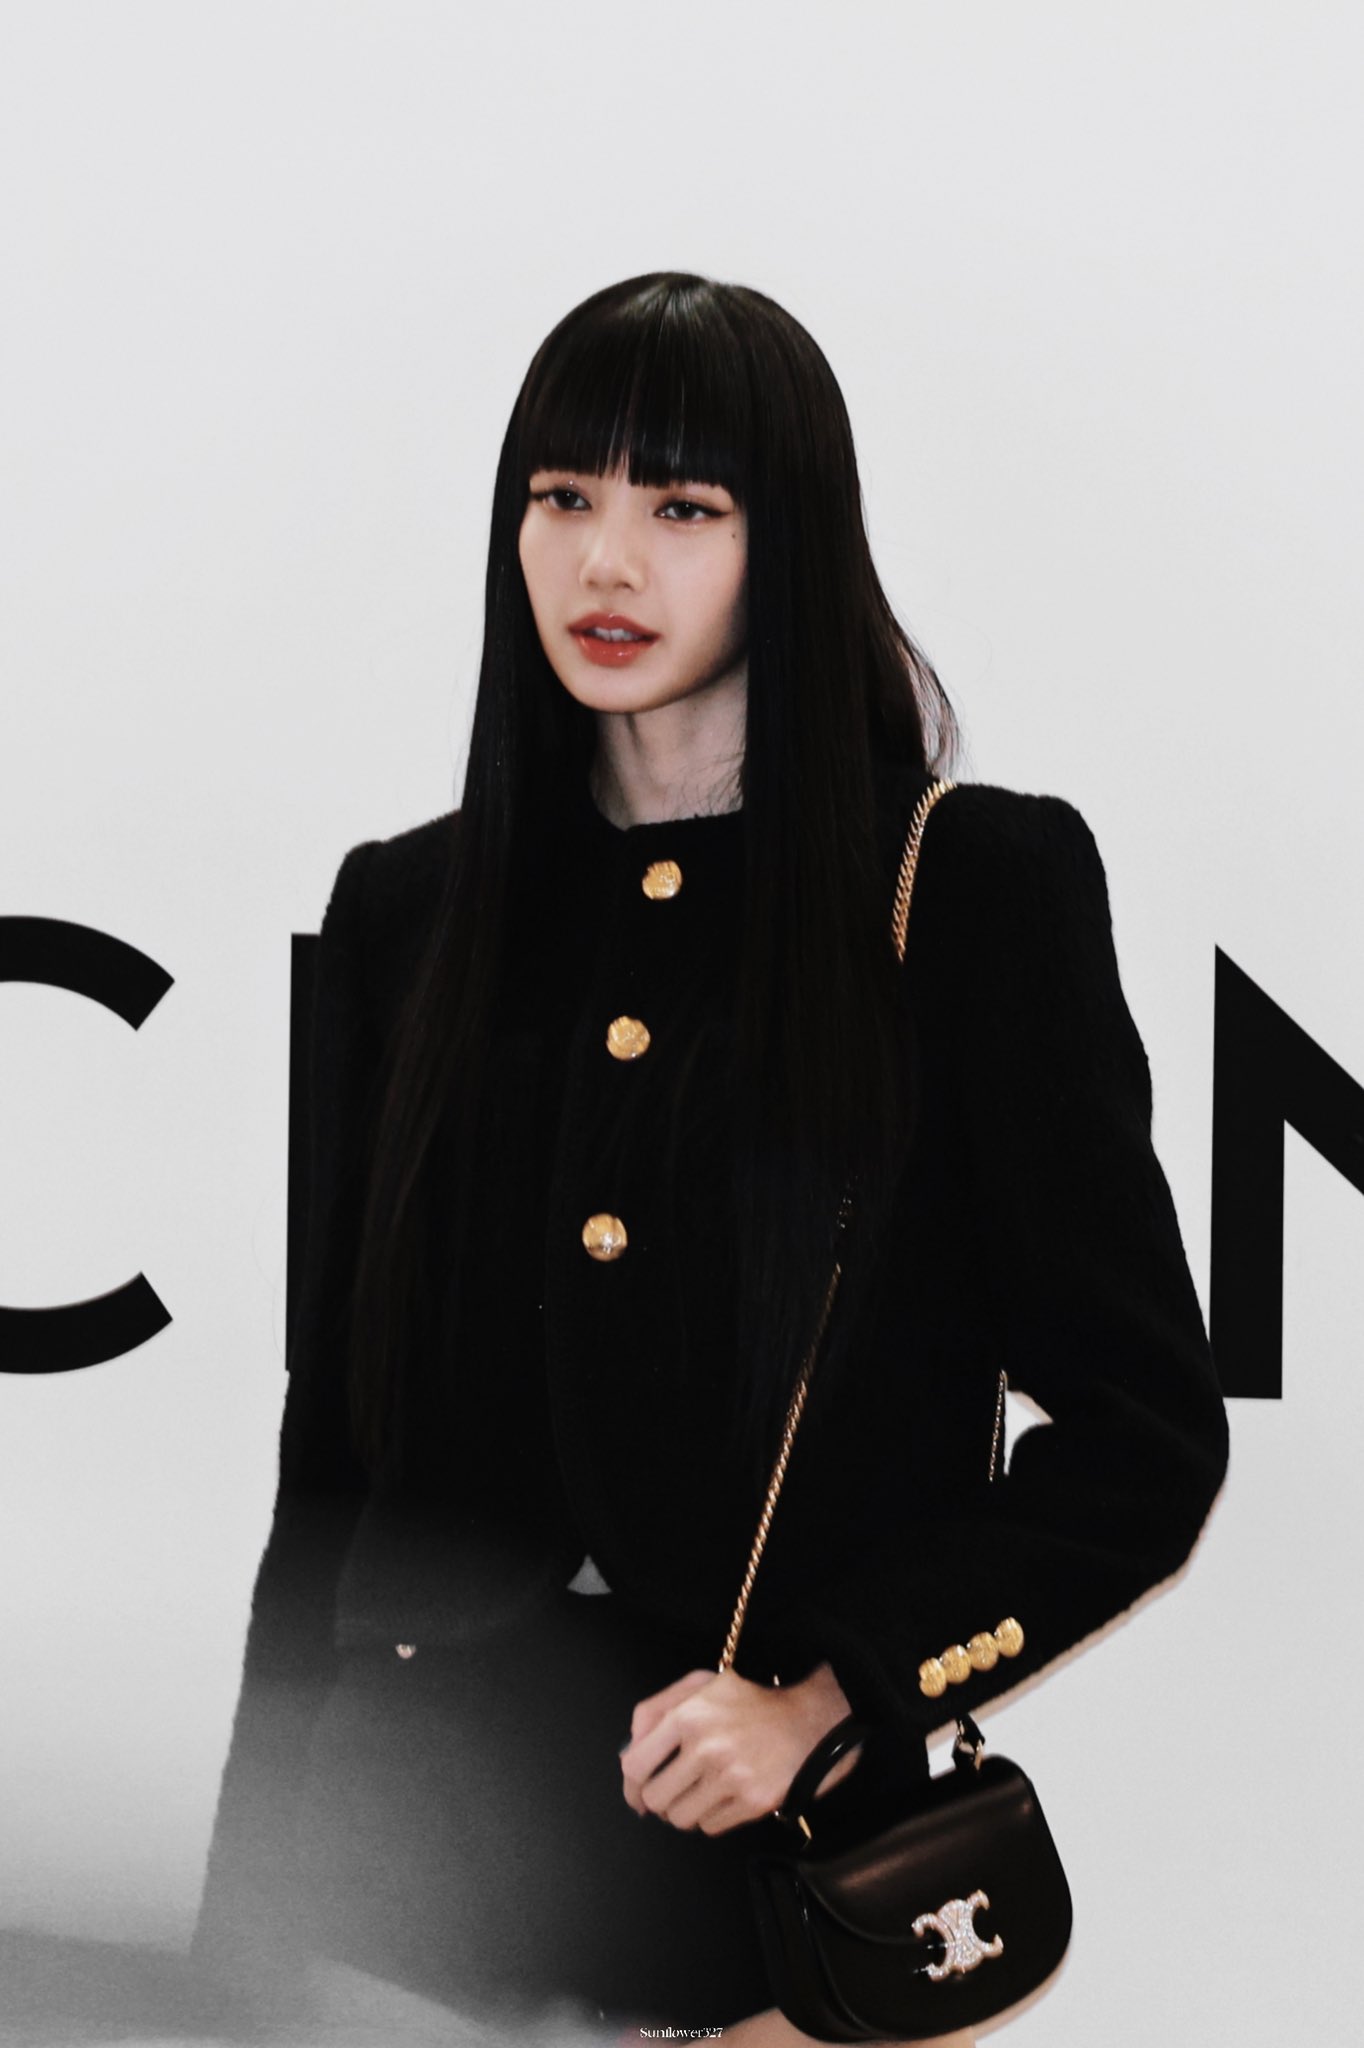 LISA on X: Let's talk about Lisa in Celine outfits. #LISAxCELINE   / X